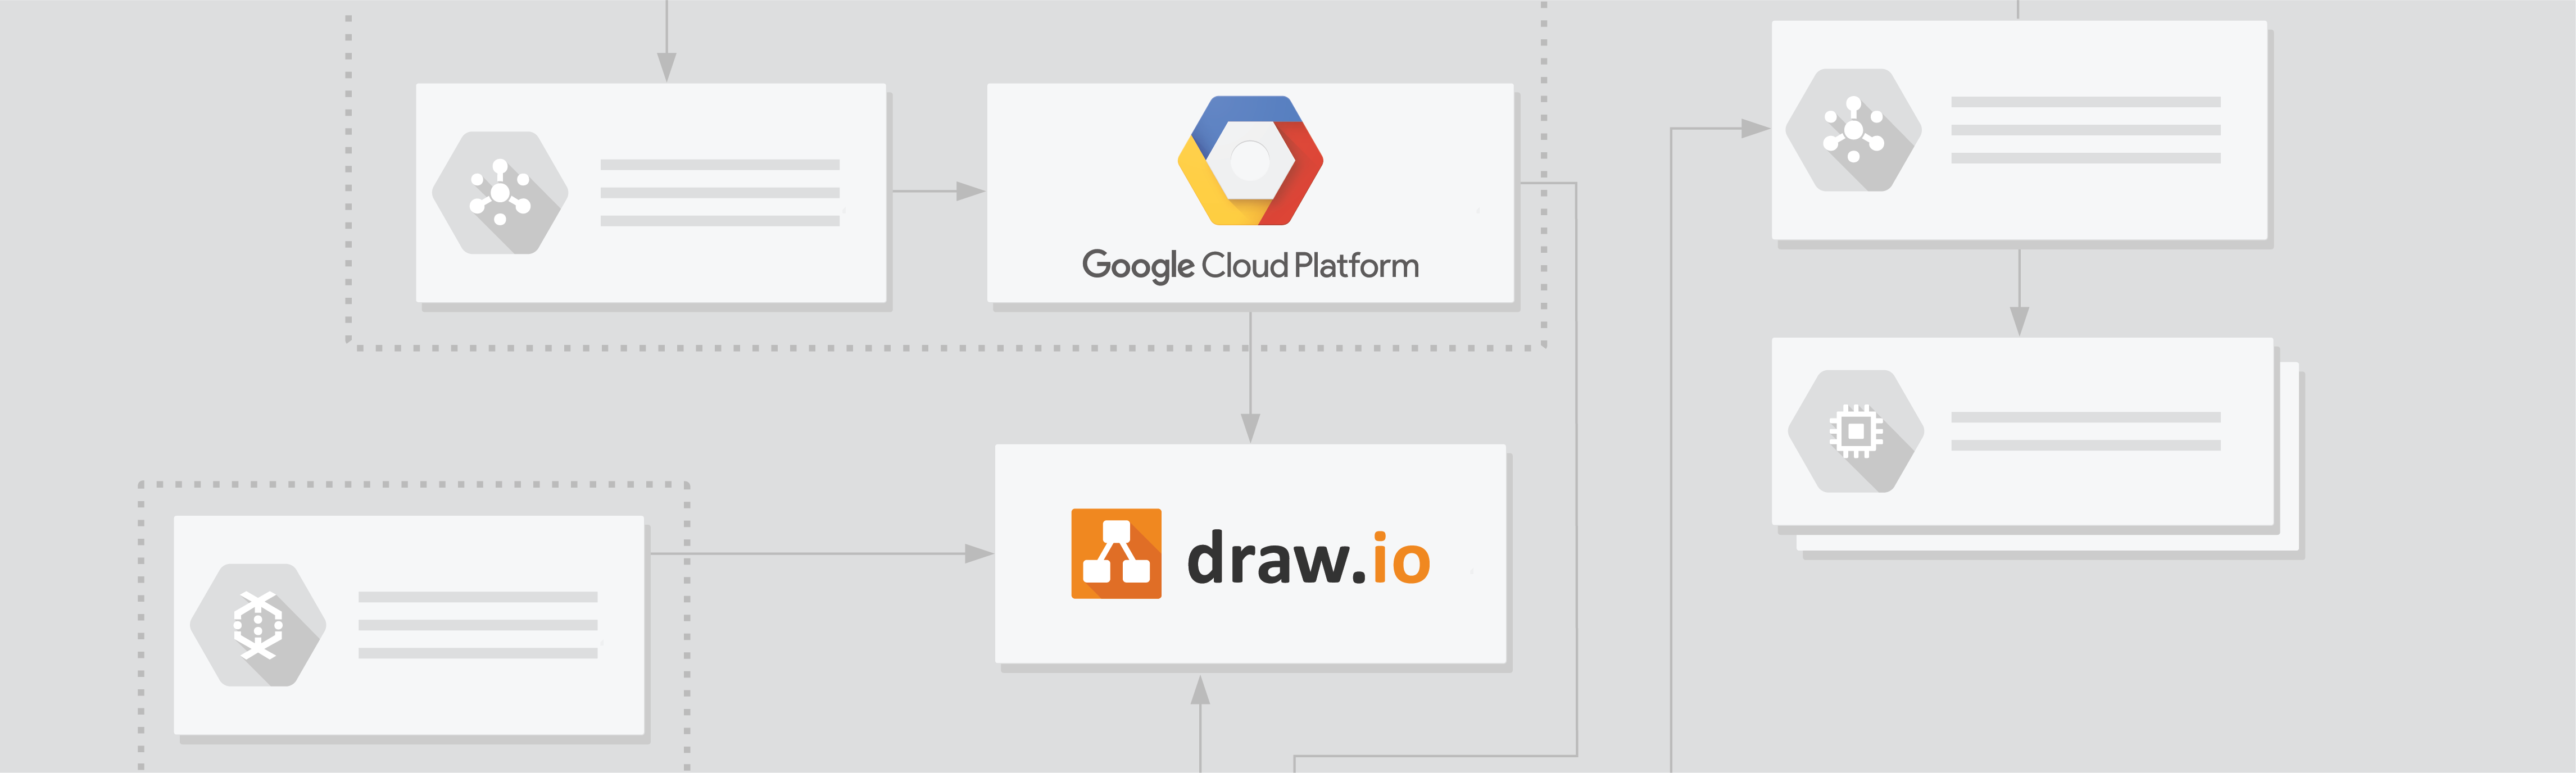 We’ve re-worked the Google Cloud Platform icon set based on the feedback you’ve given us.